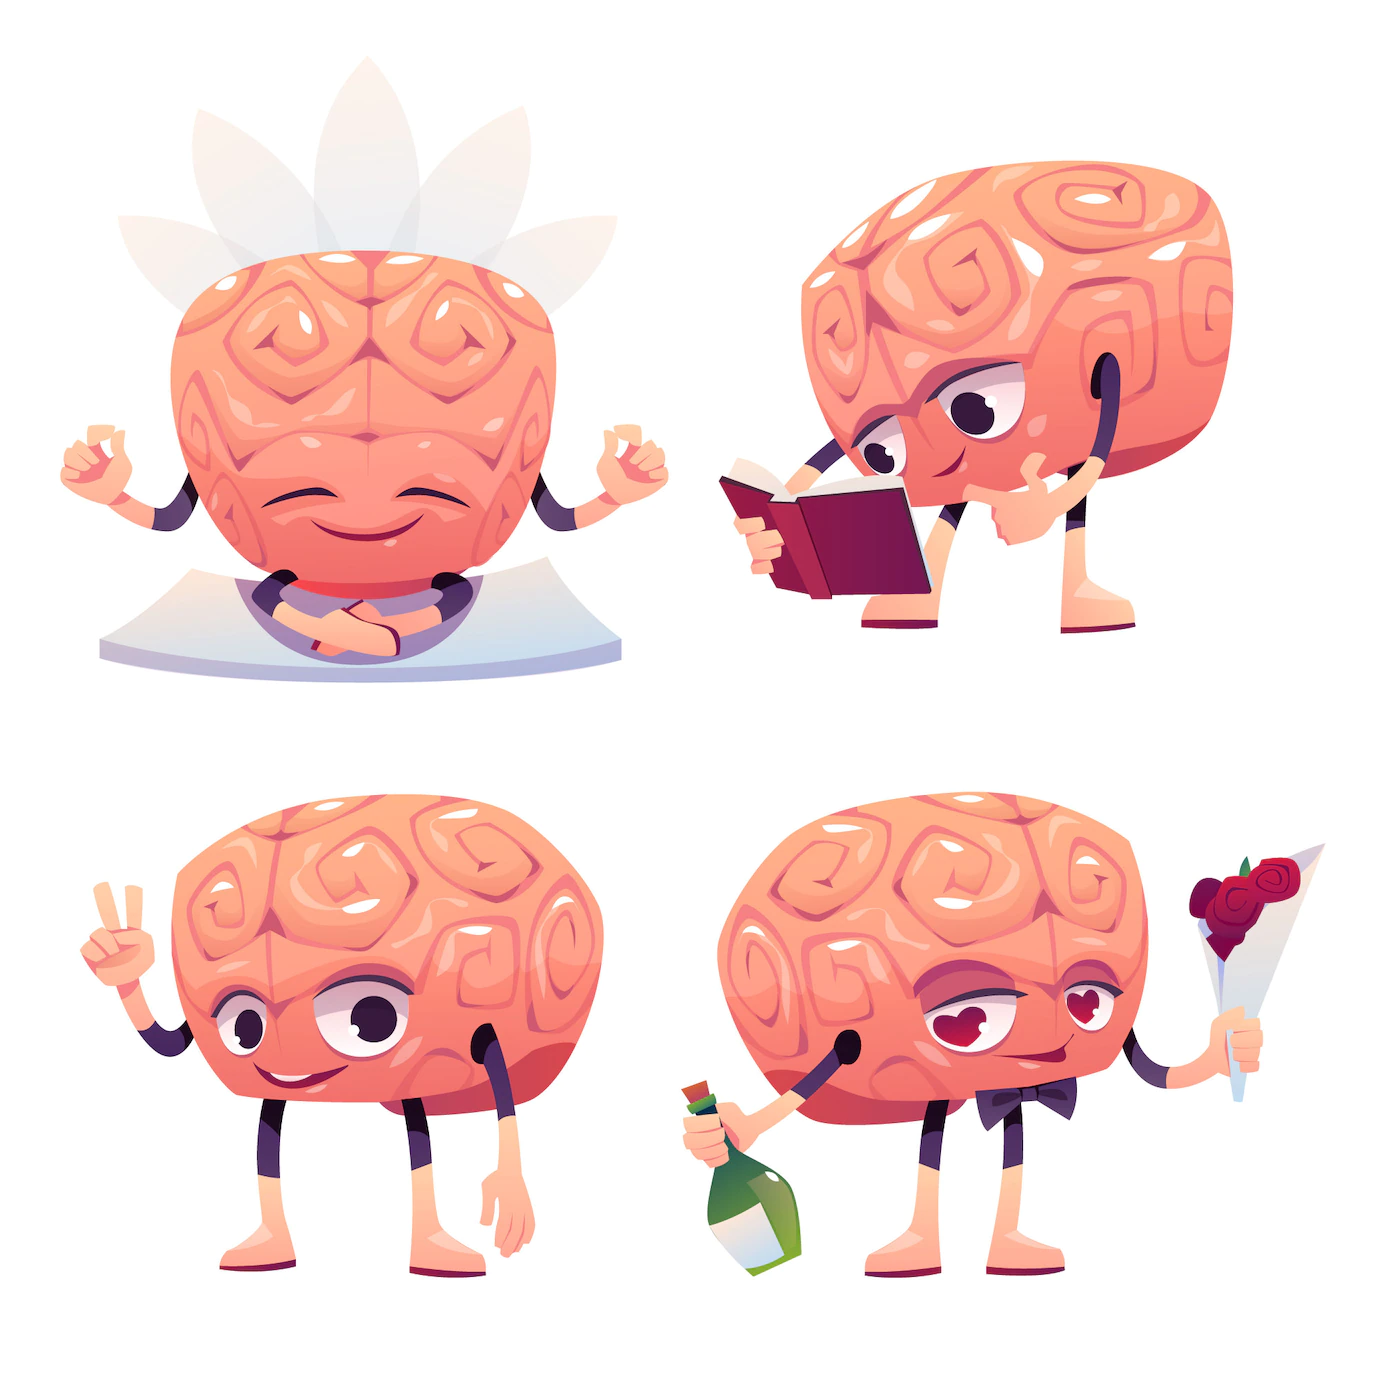 Cute Brain Character Different Poses 107791 2273